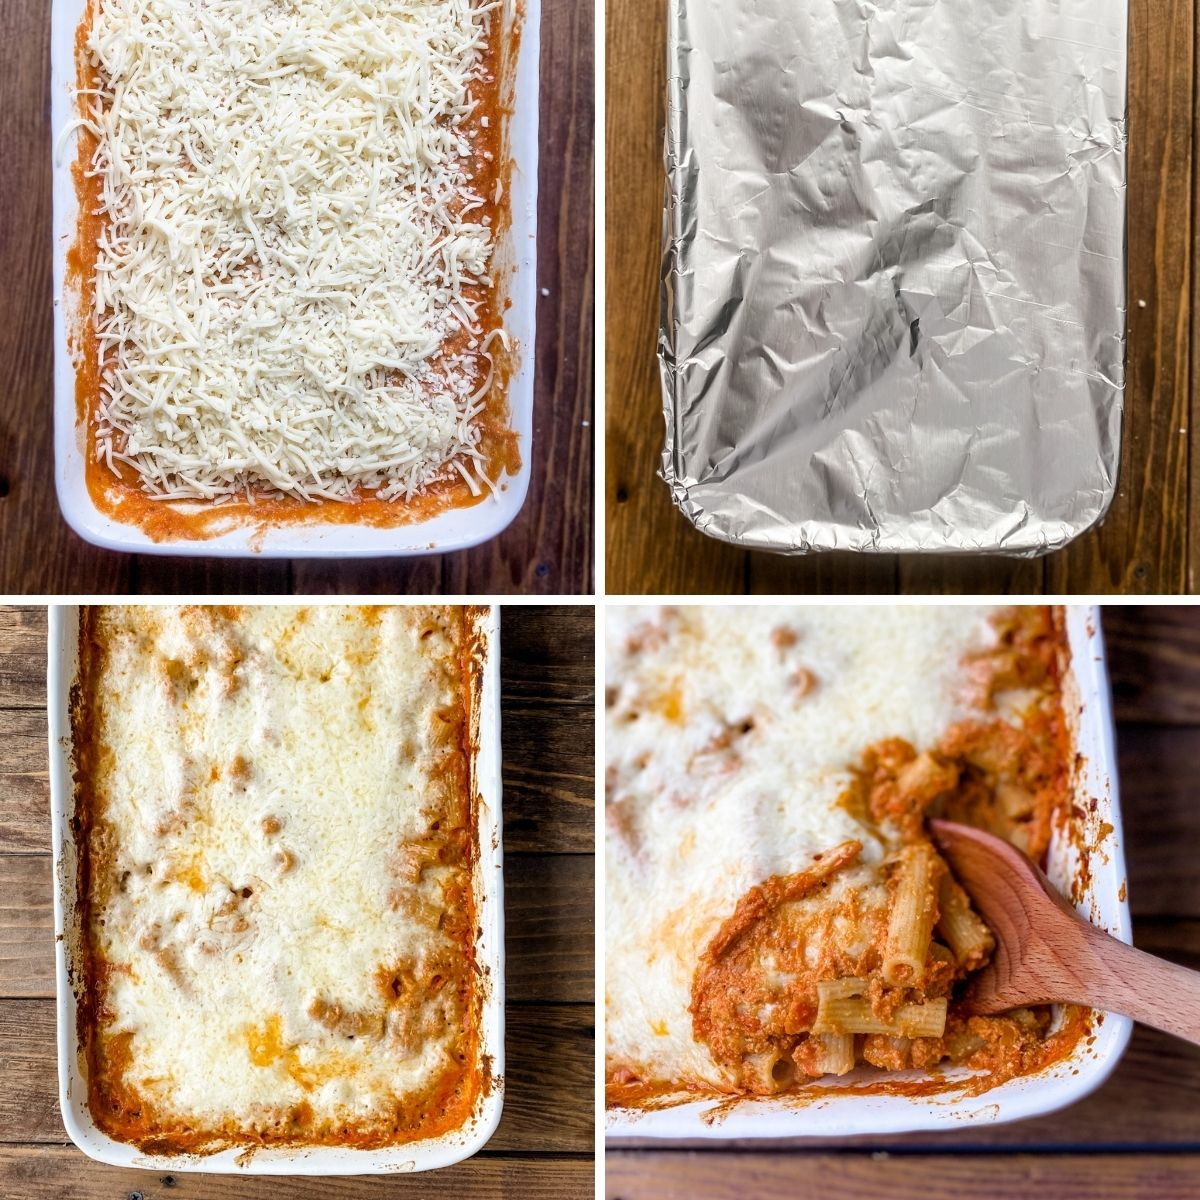 another collage showing the finishing steps to making gluten free ziti